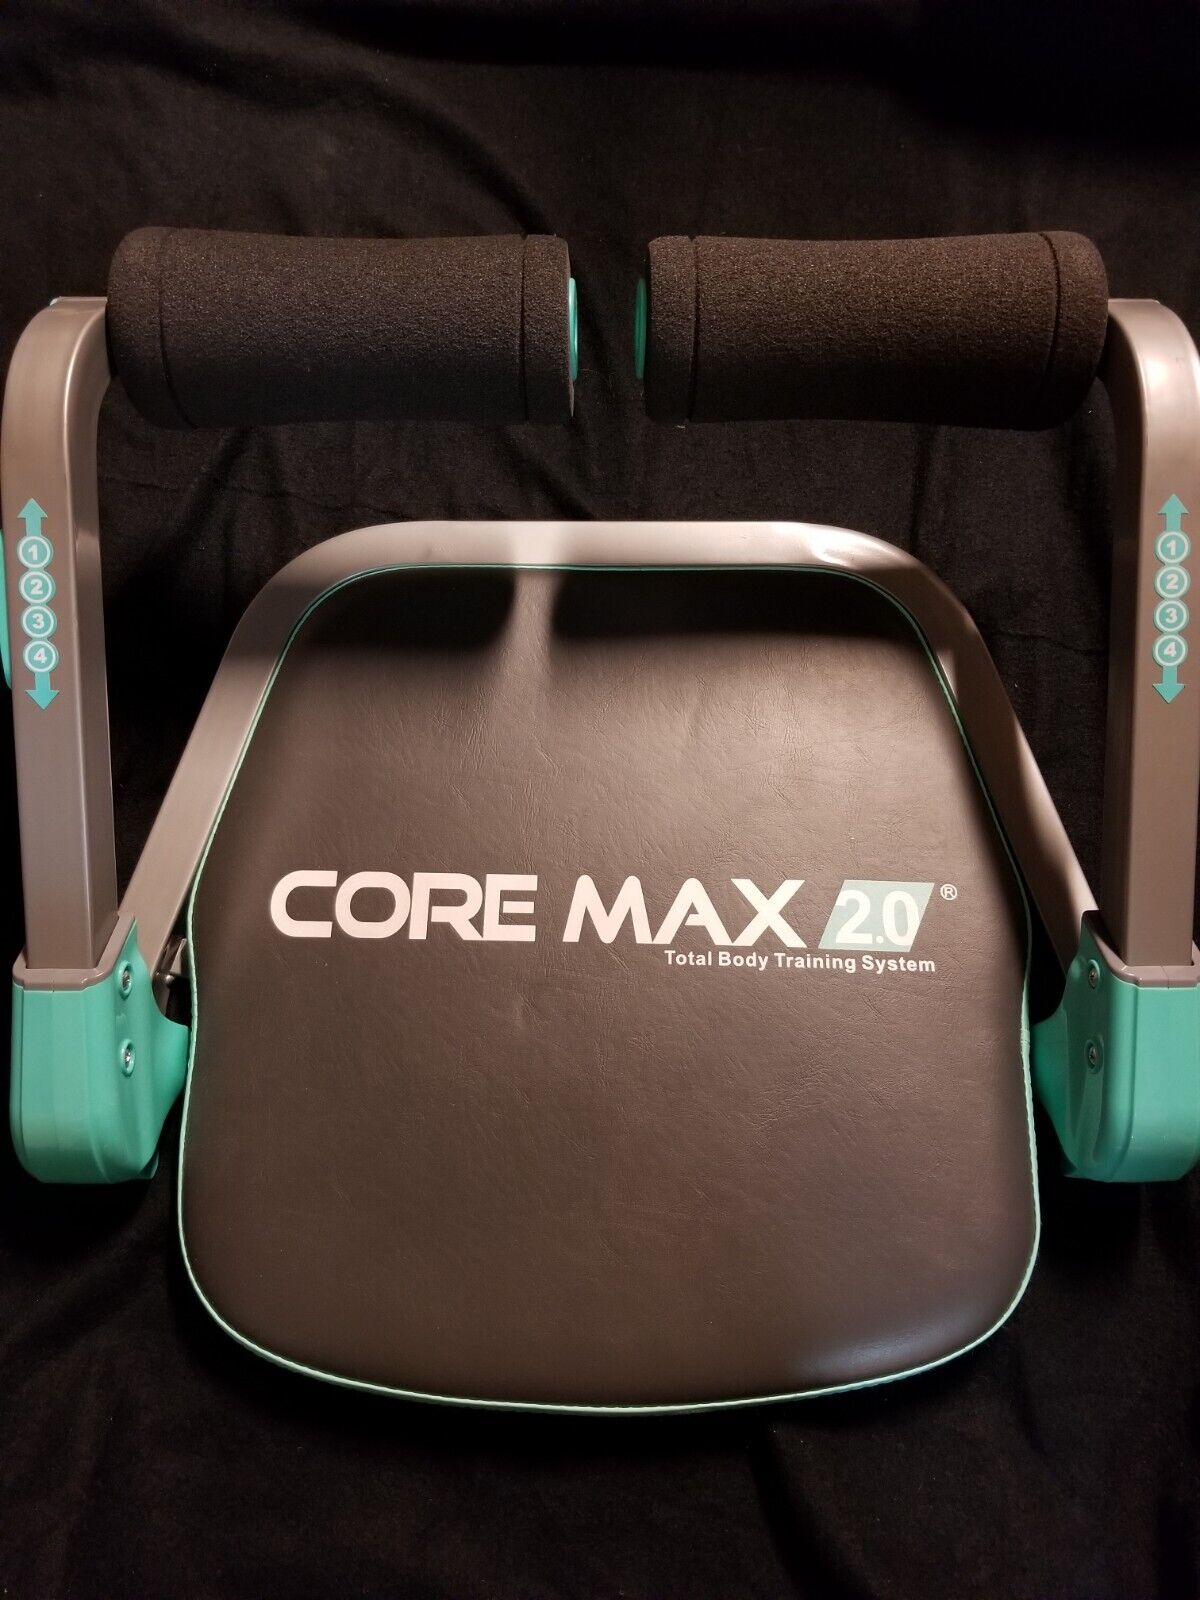 Core Max Smart Abs and Total Body Workout Cardio Home Gym Training System |  eBay